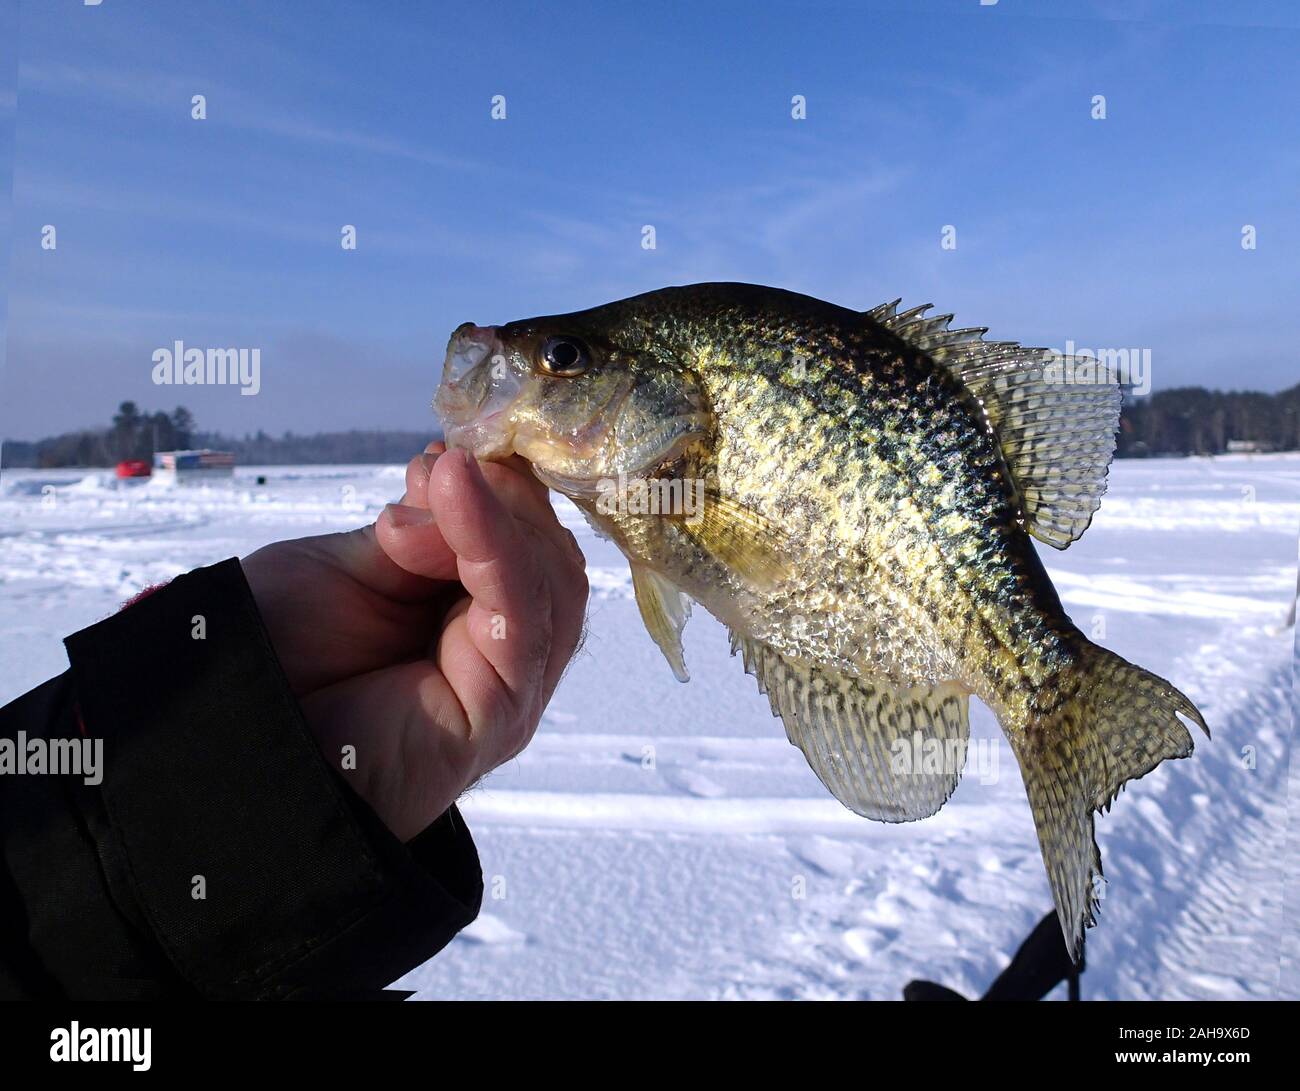 Fisherman holds a Crappie for display against a blue sky and a frozen lake Stock Photo